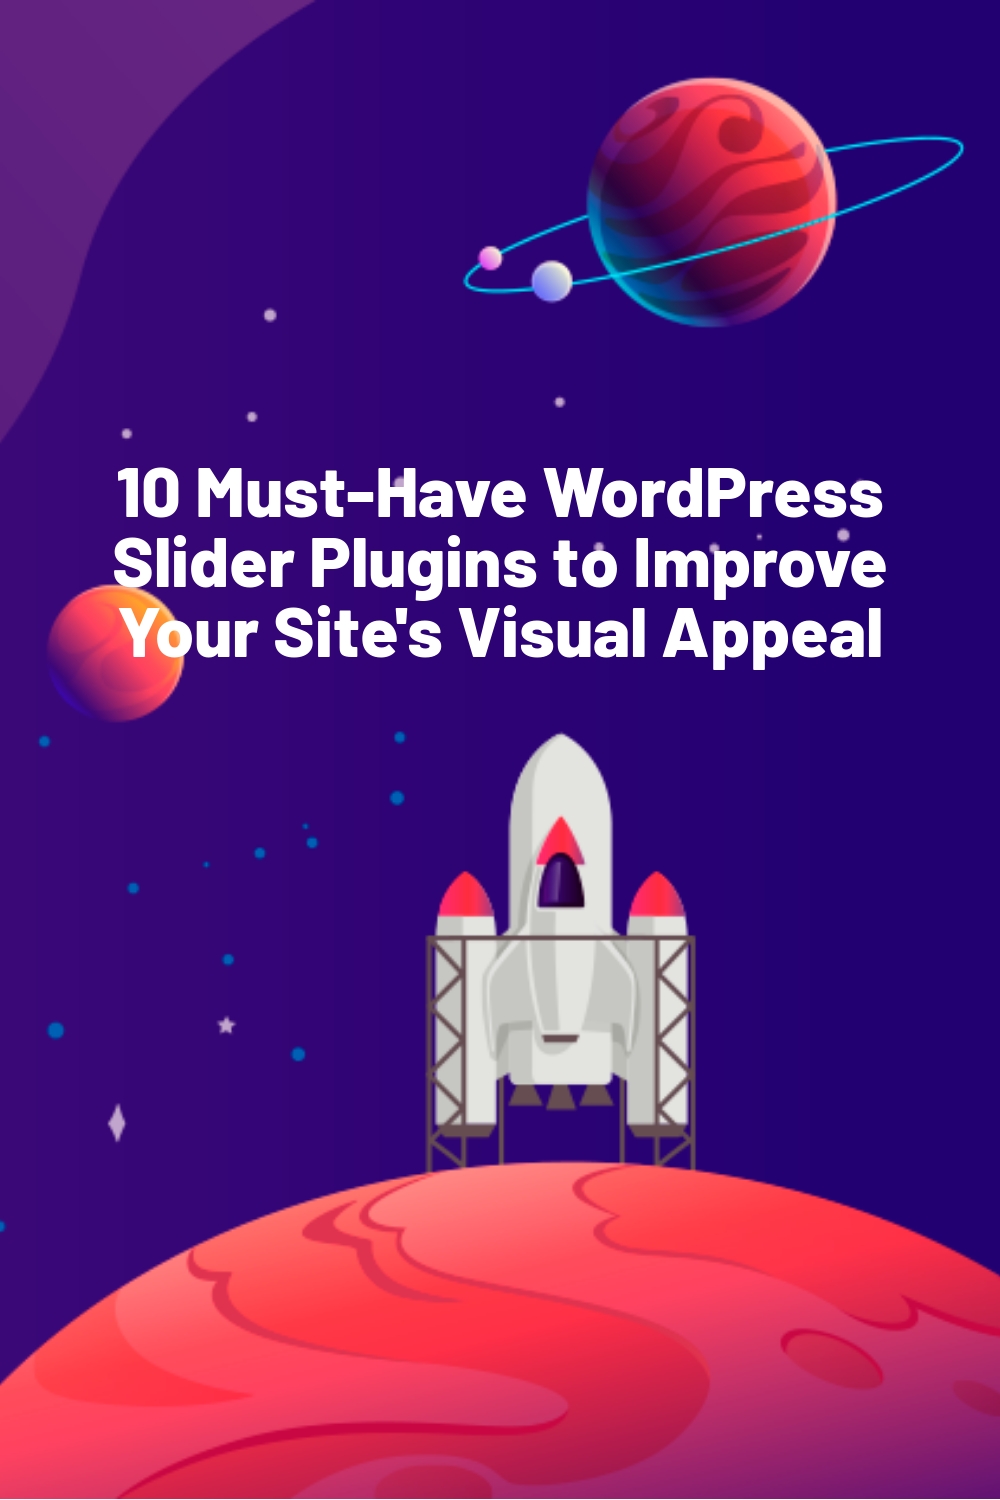 10 Must-Have WordPress Slider Plugins to Improve Your Site’s Visual Appeal